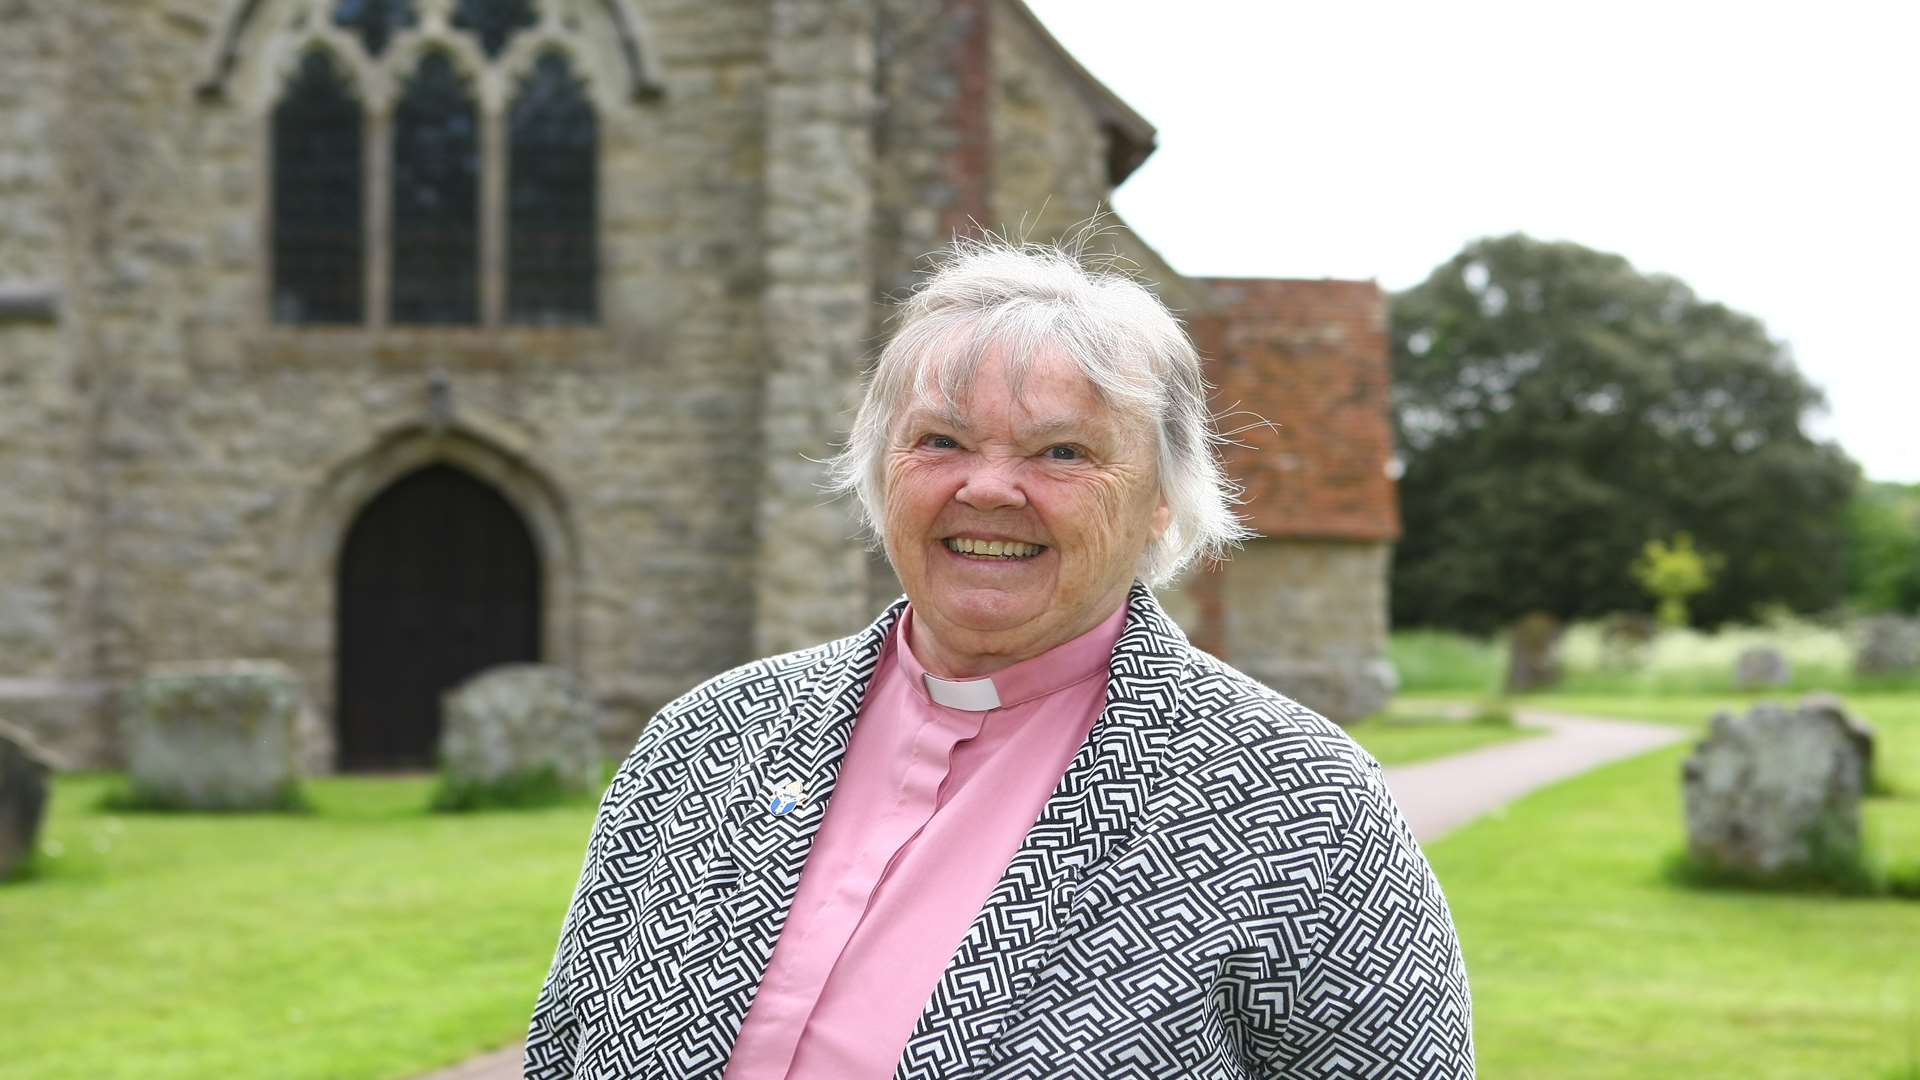 Rev Sheila's last service will be on Sunday, June 14